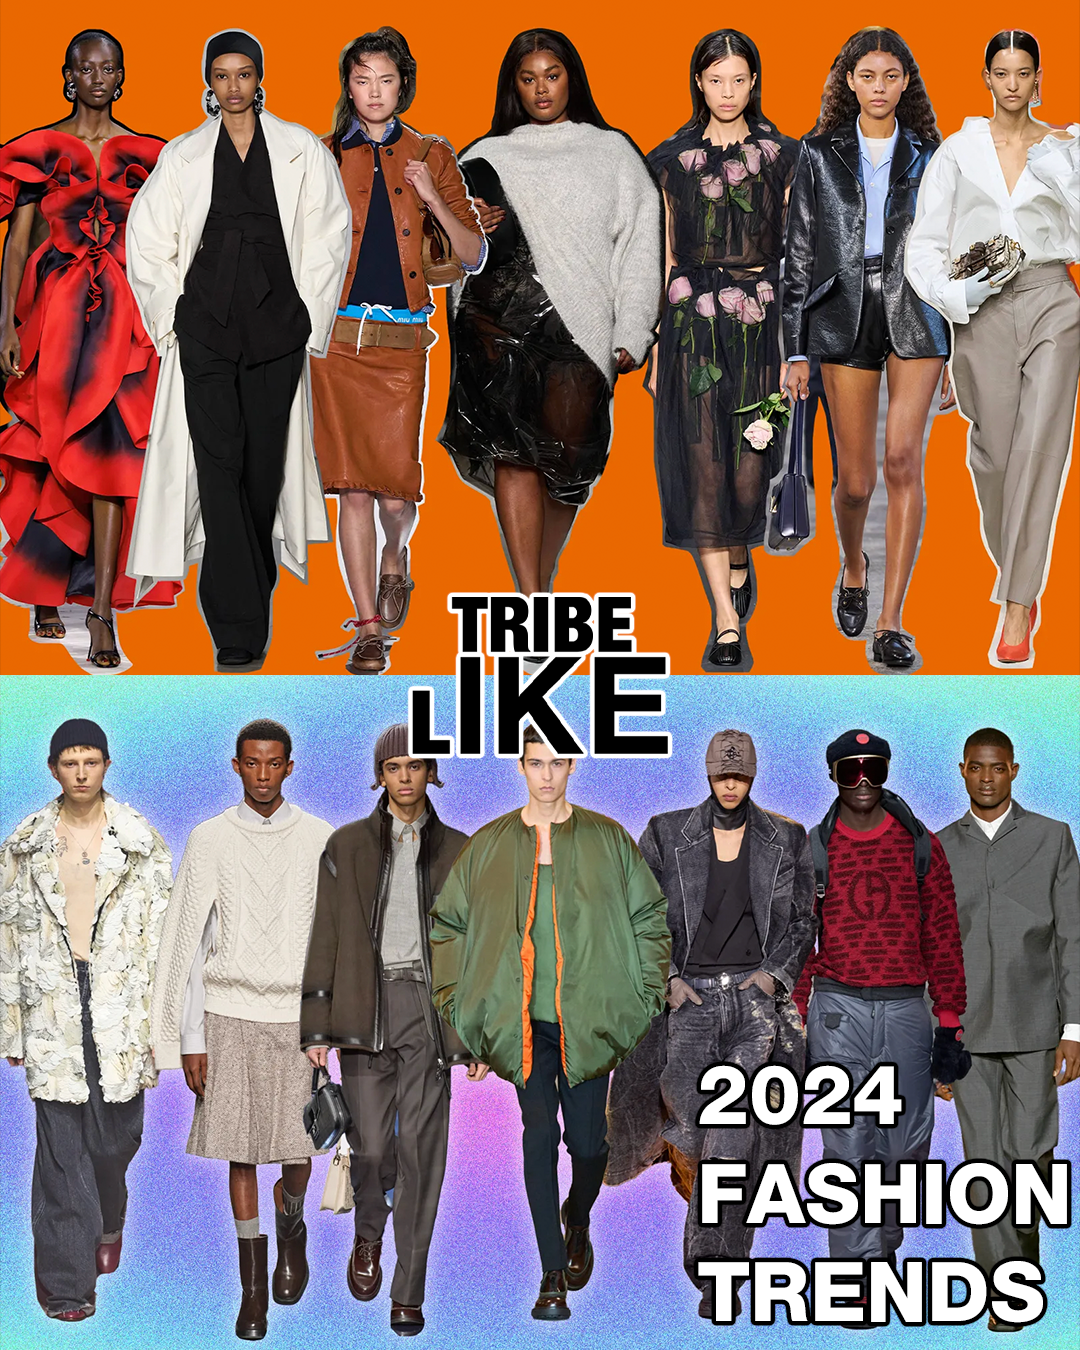 Trendspotting: Possible Fashion Trends of 2024